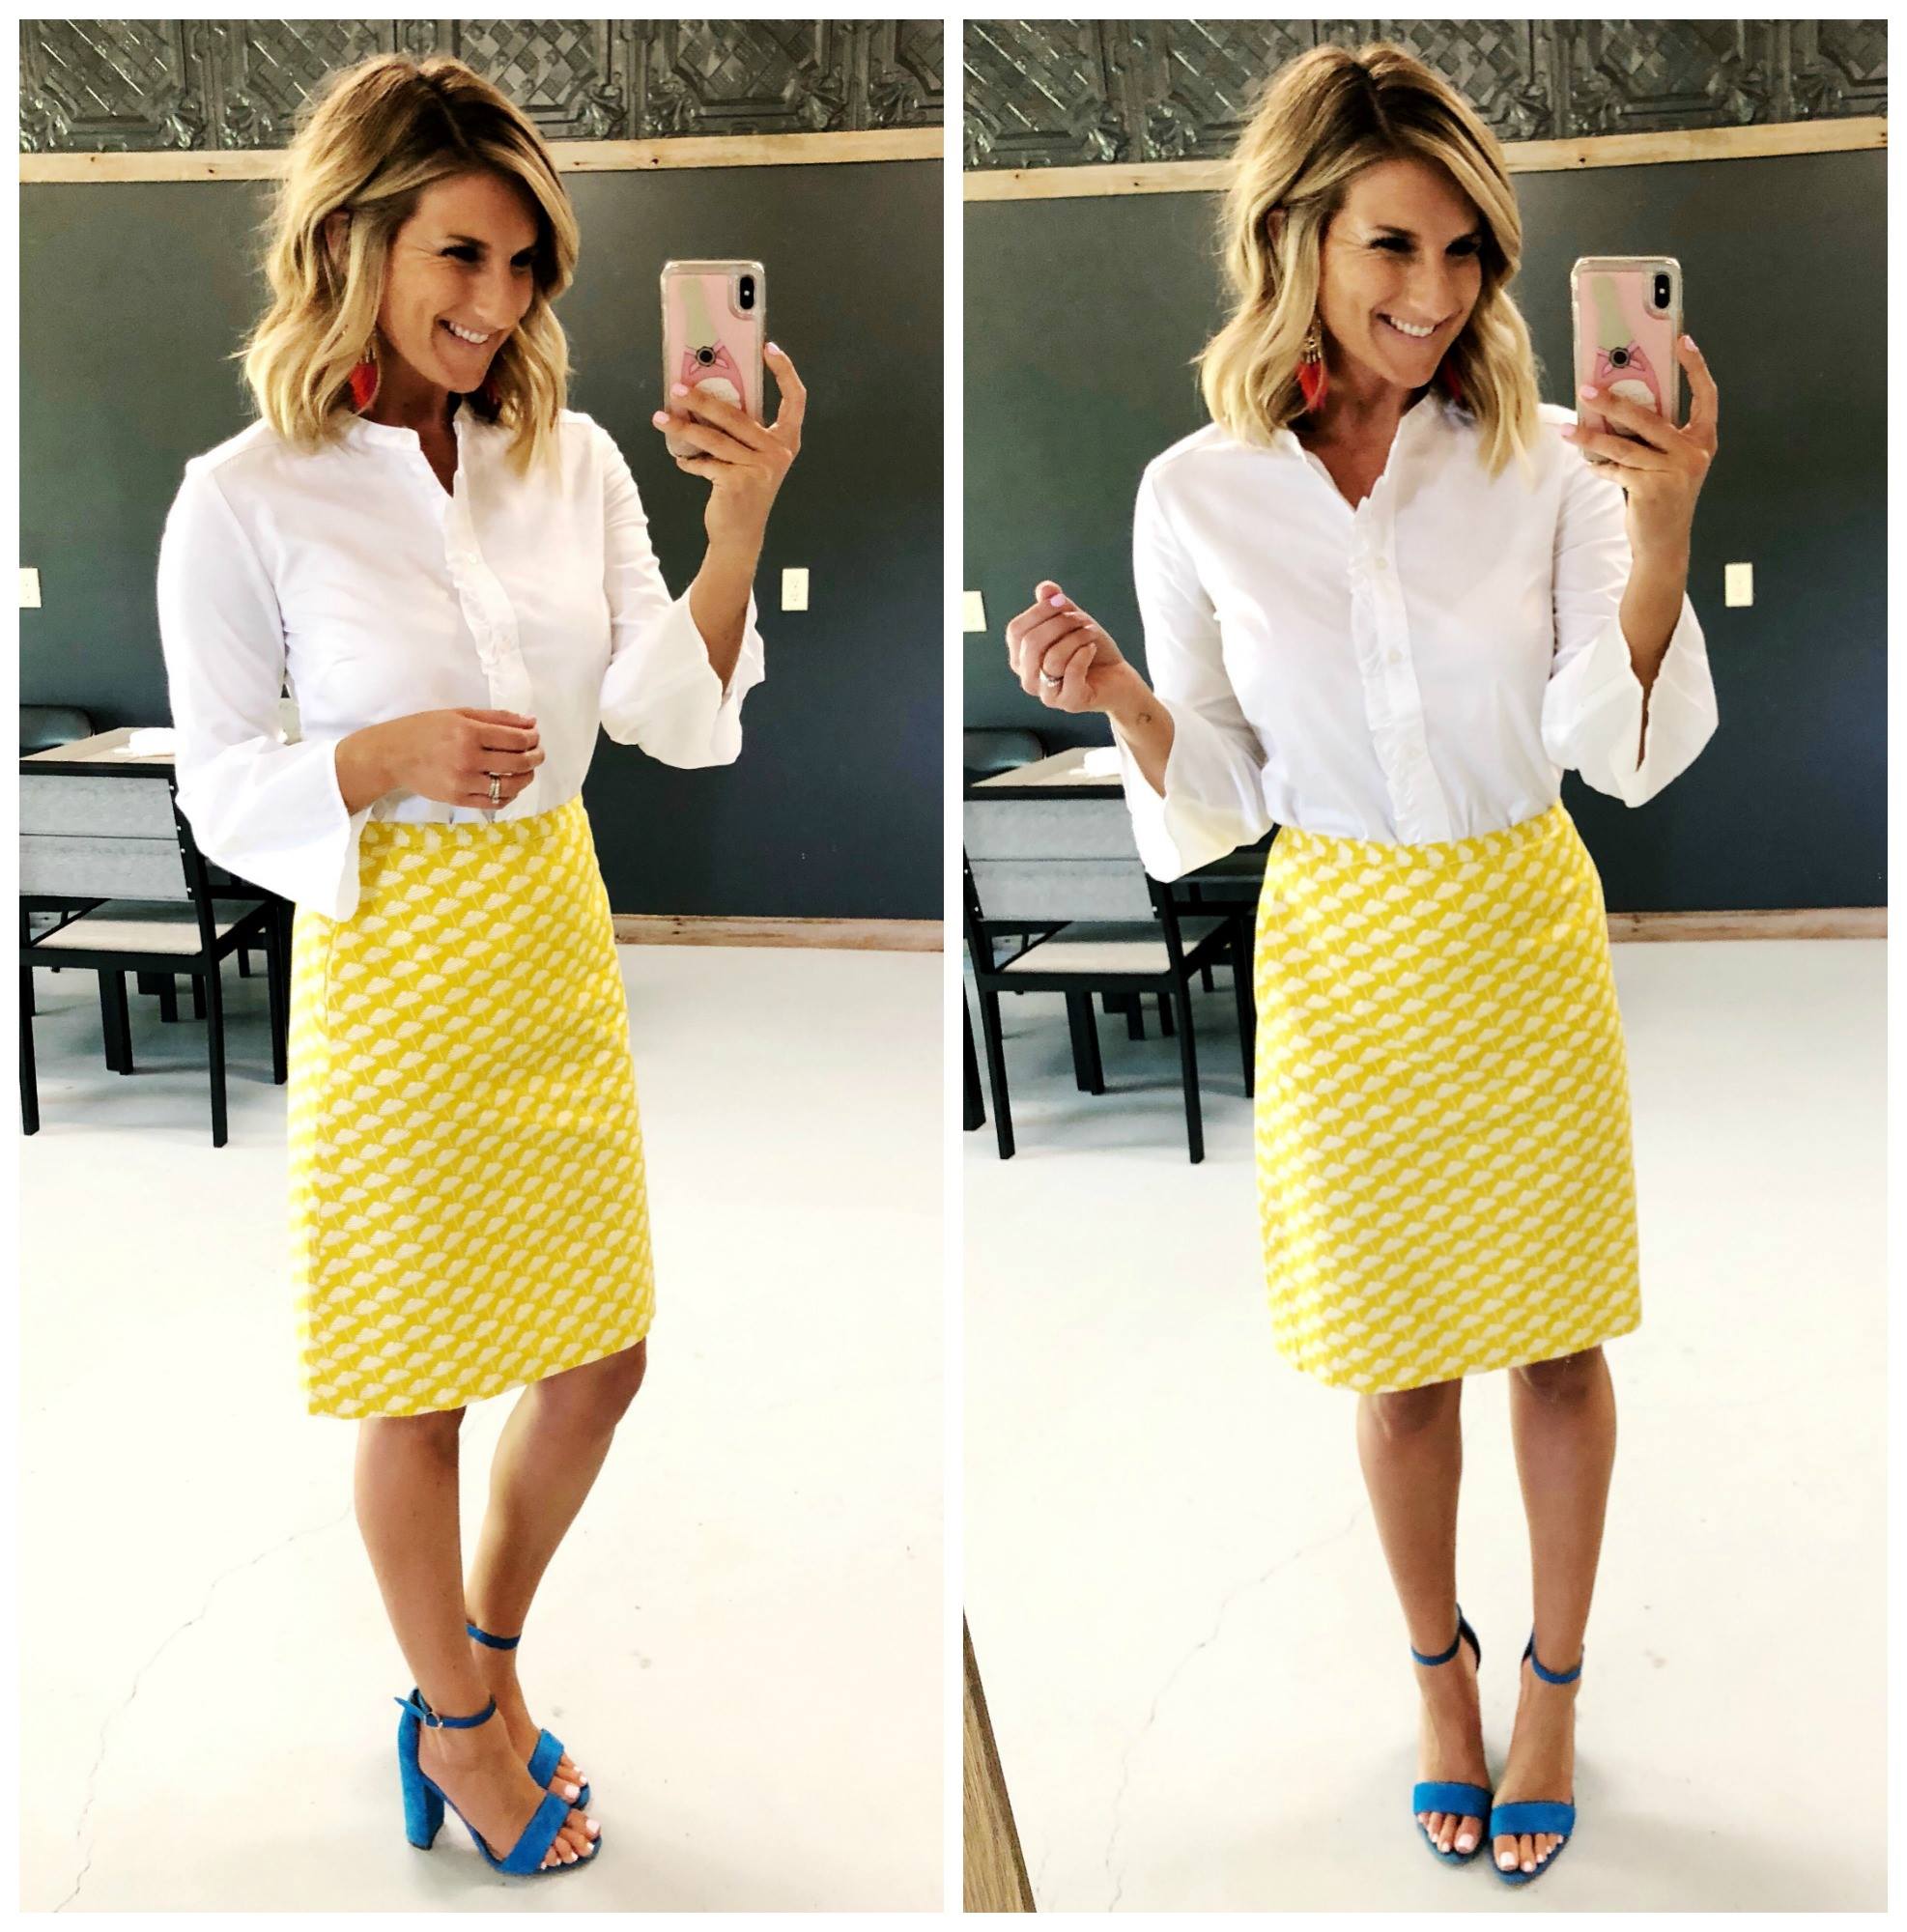 Work Wear // What to wear for work in the Spring and Summer // How to style a printed skirt // Statement heels